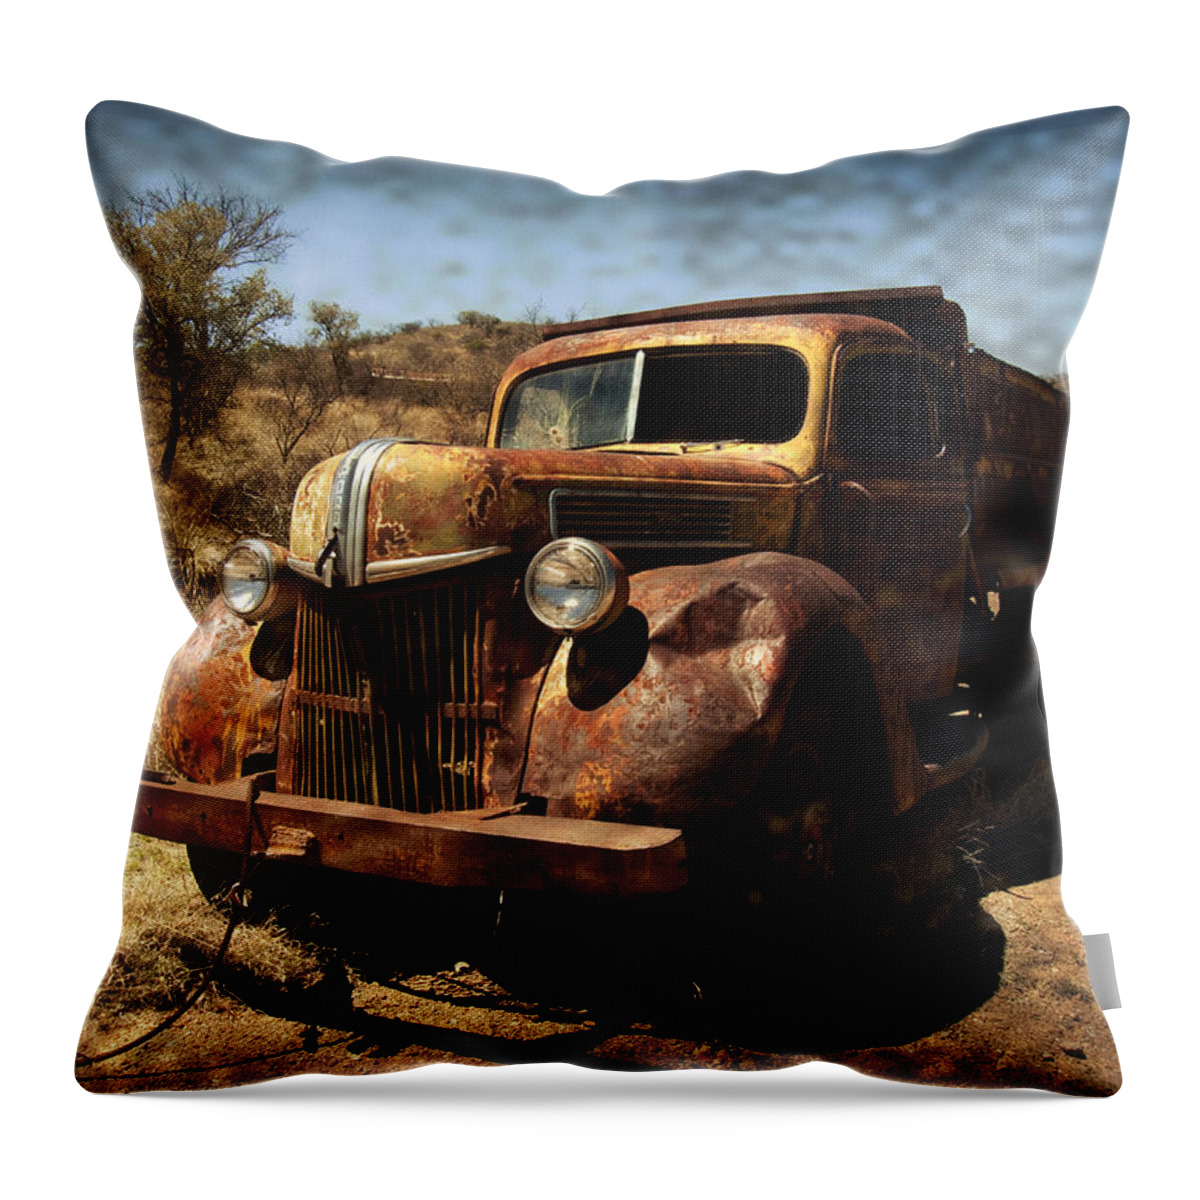 Arizona Throw Pillow featuring the photograph The Old Ford by Lucinda Walter